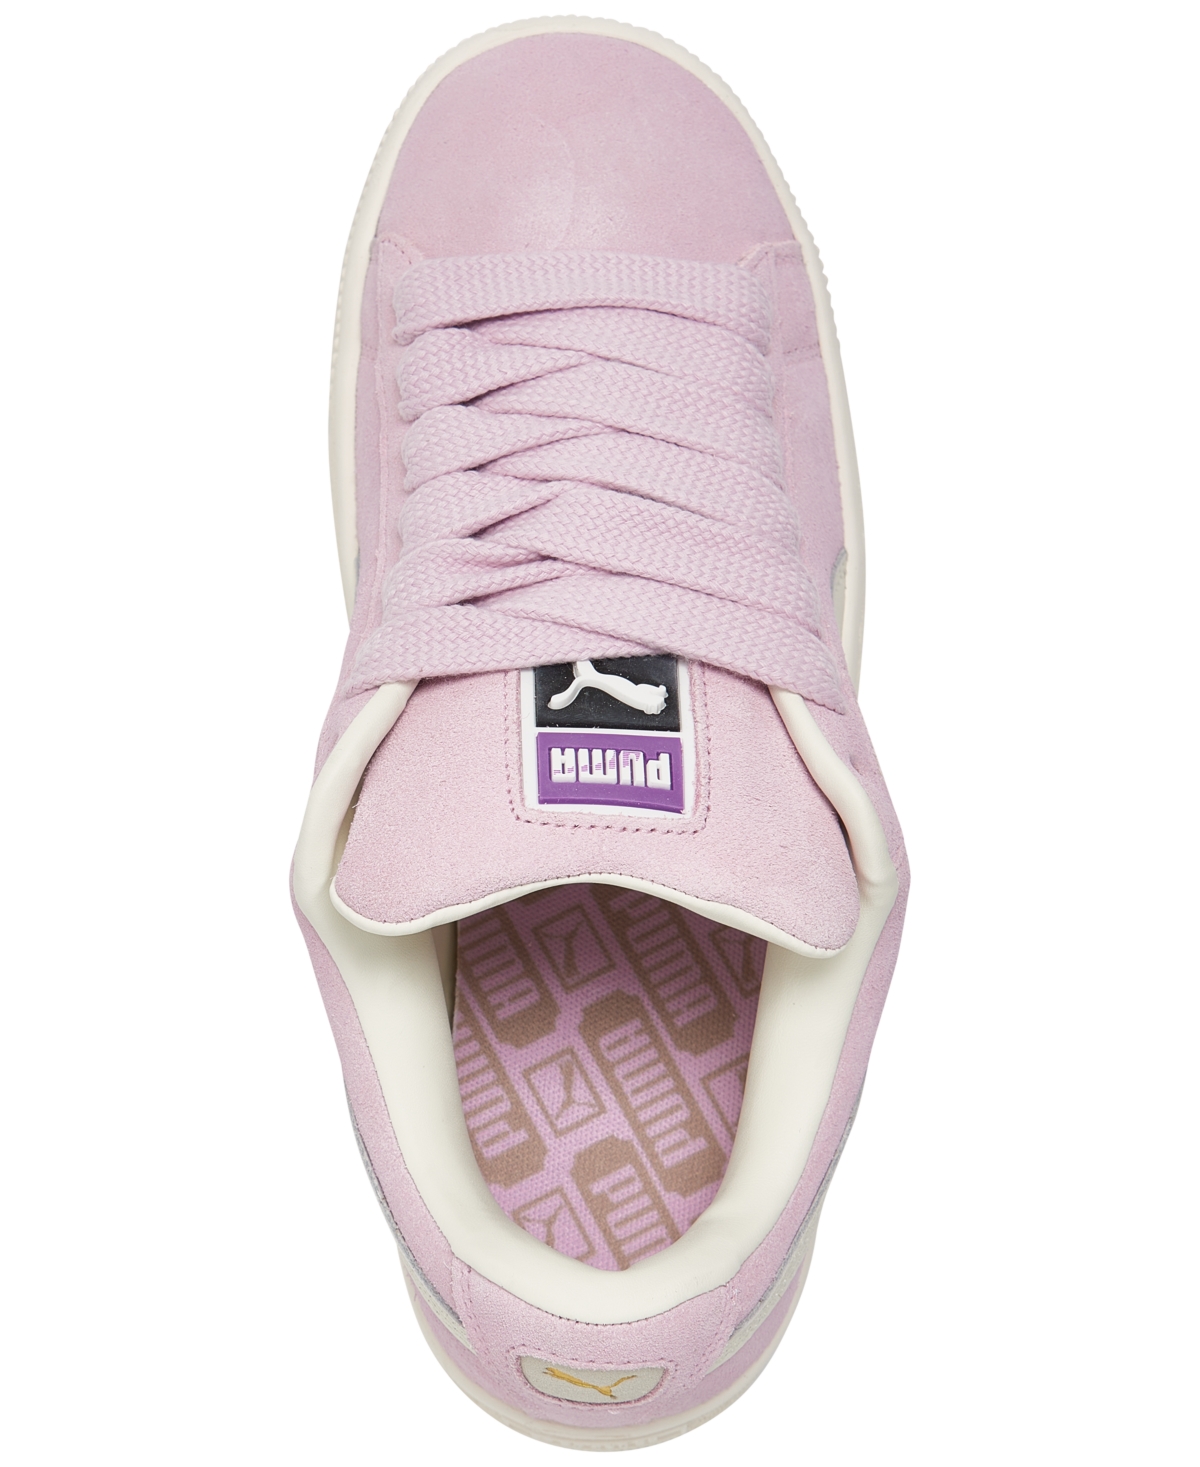 Shop Puma Women's Suede Xl Casual Sneakers From Finish Line In Purple